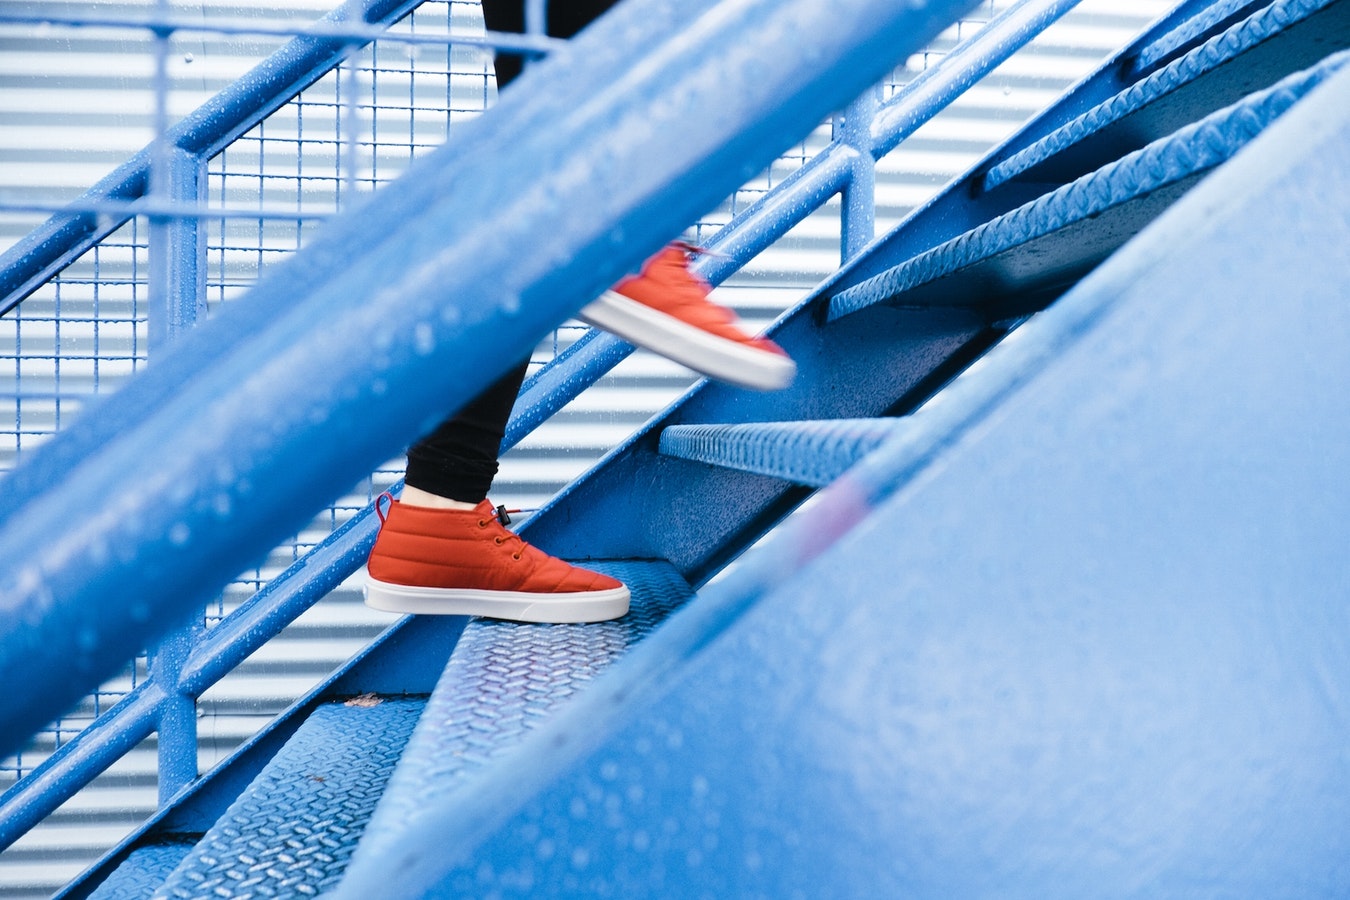 Stairway Accident Attorneys in Los Angeles